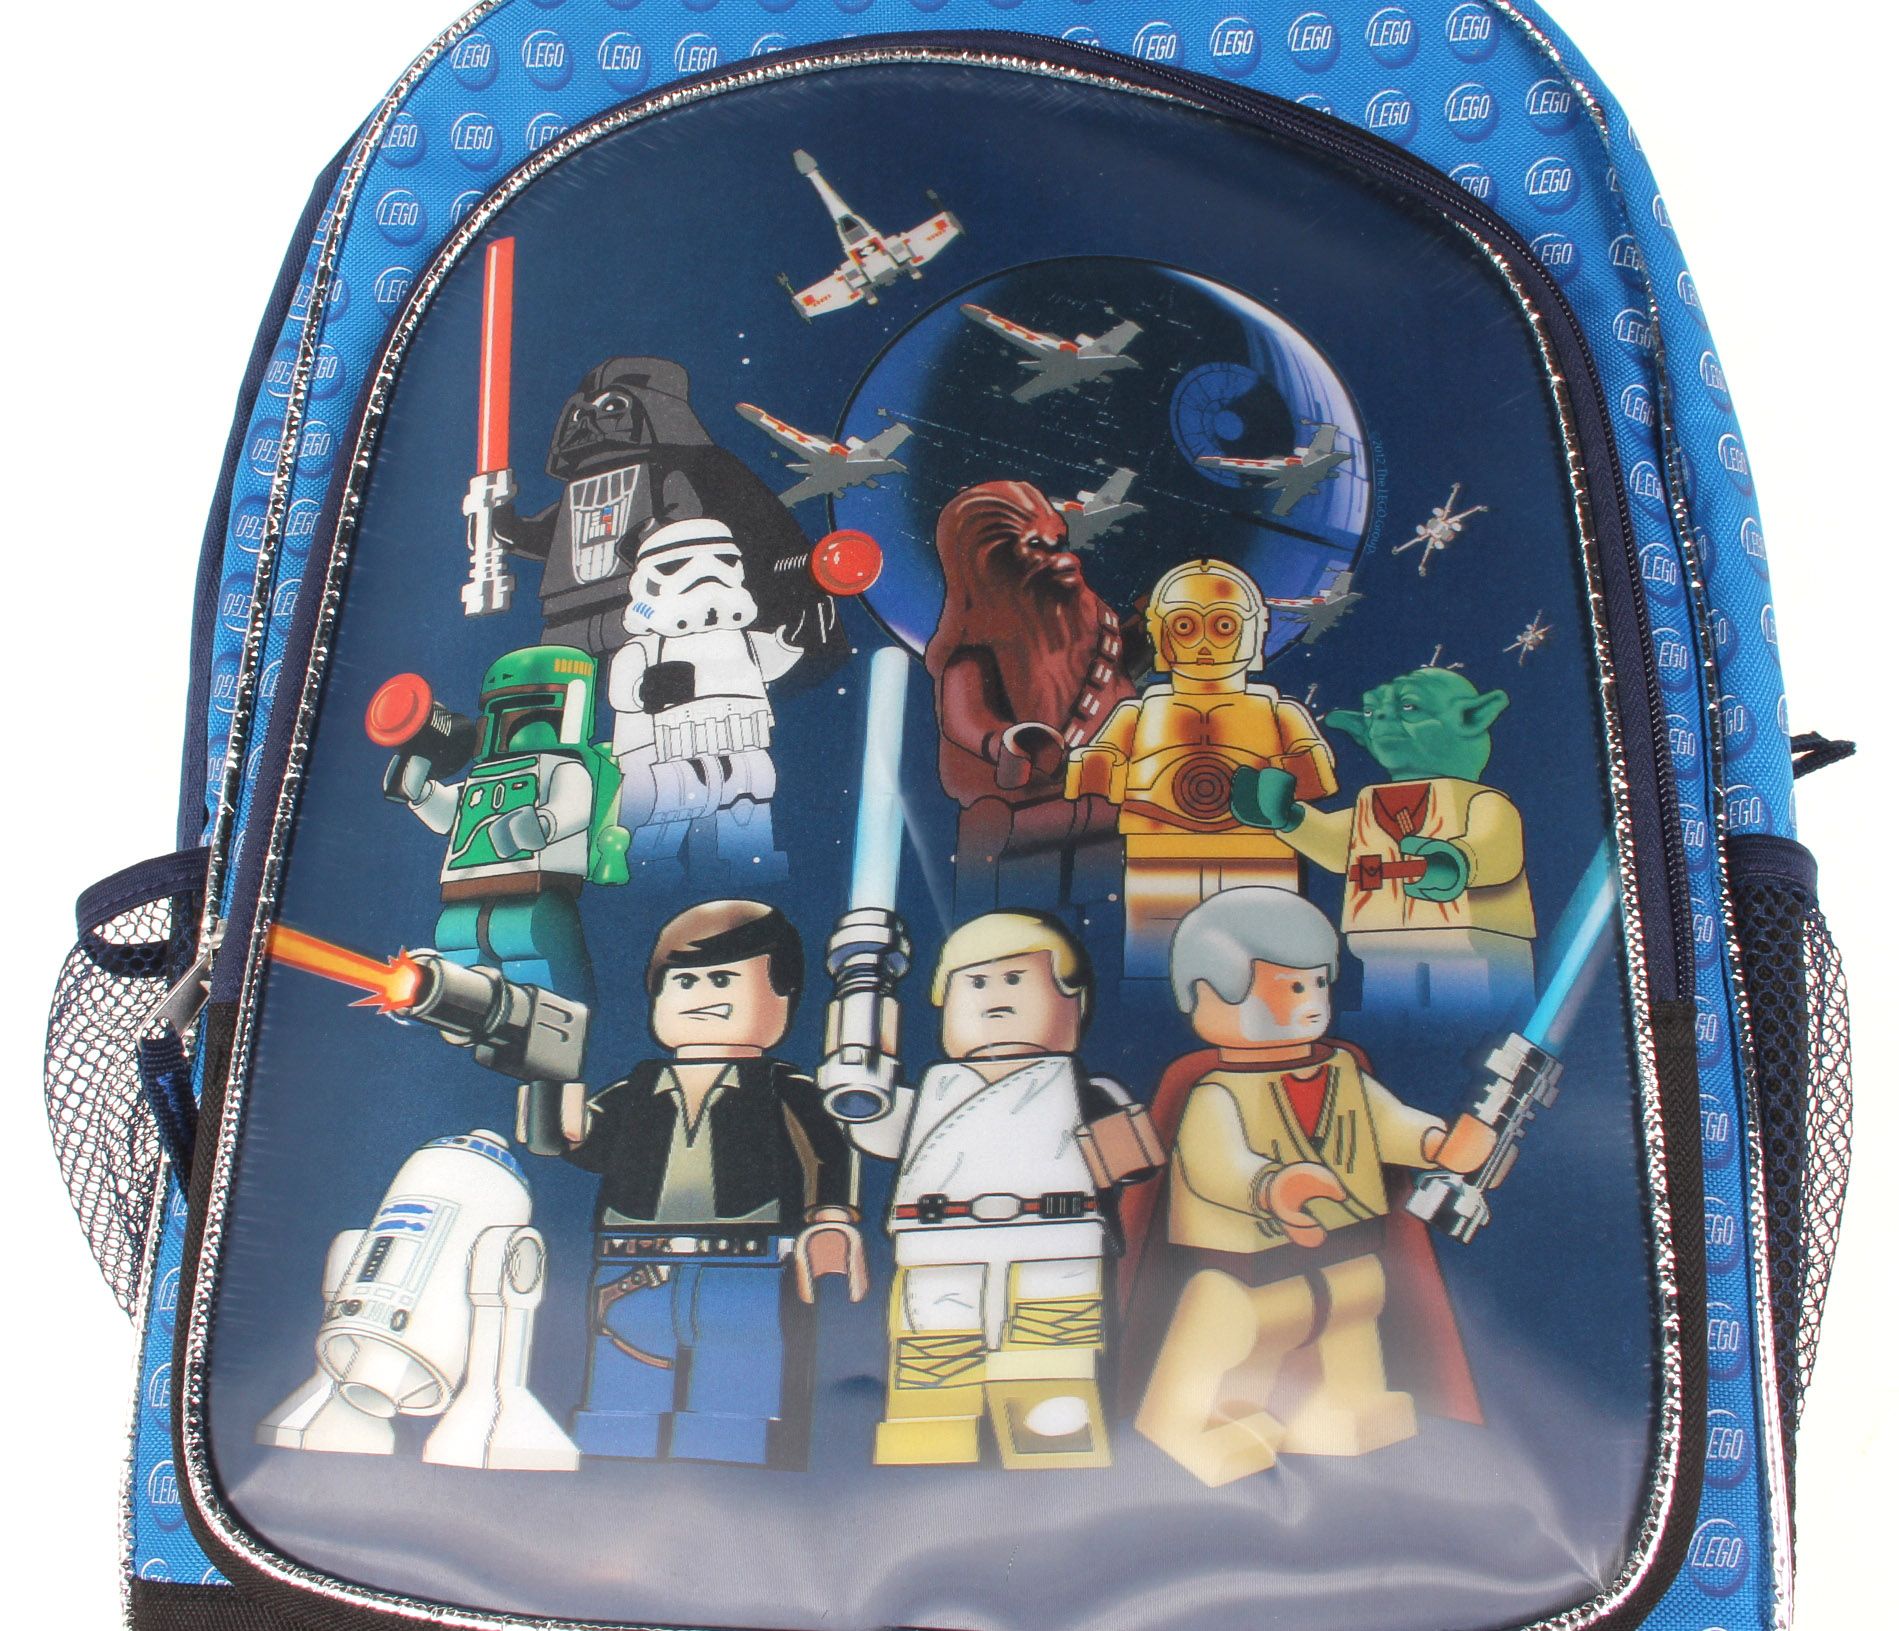 Lego Star Wars Characters Backpack Hans Luke Chewbacca R2D2 C3PO Vader ...